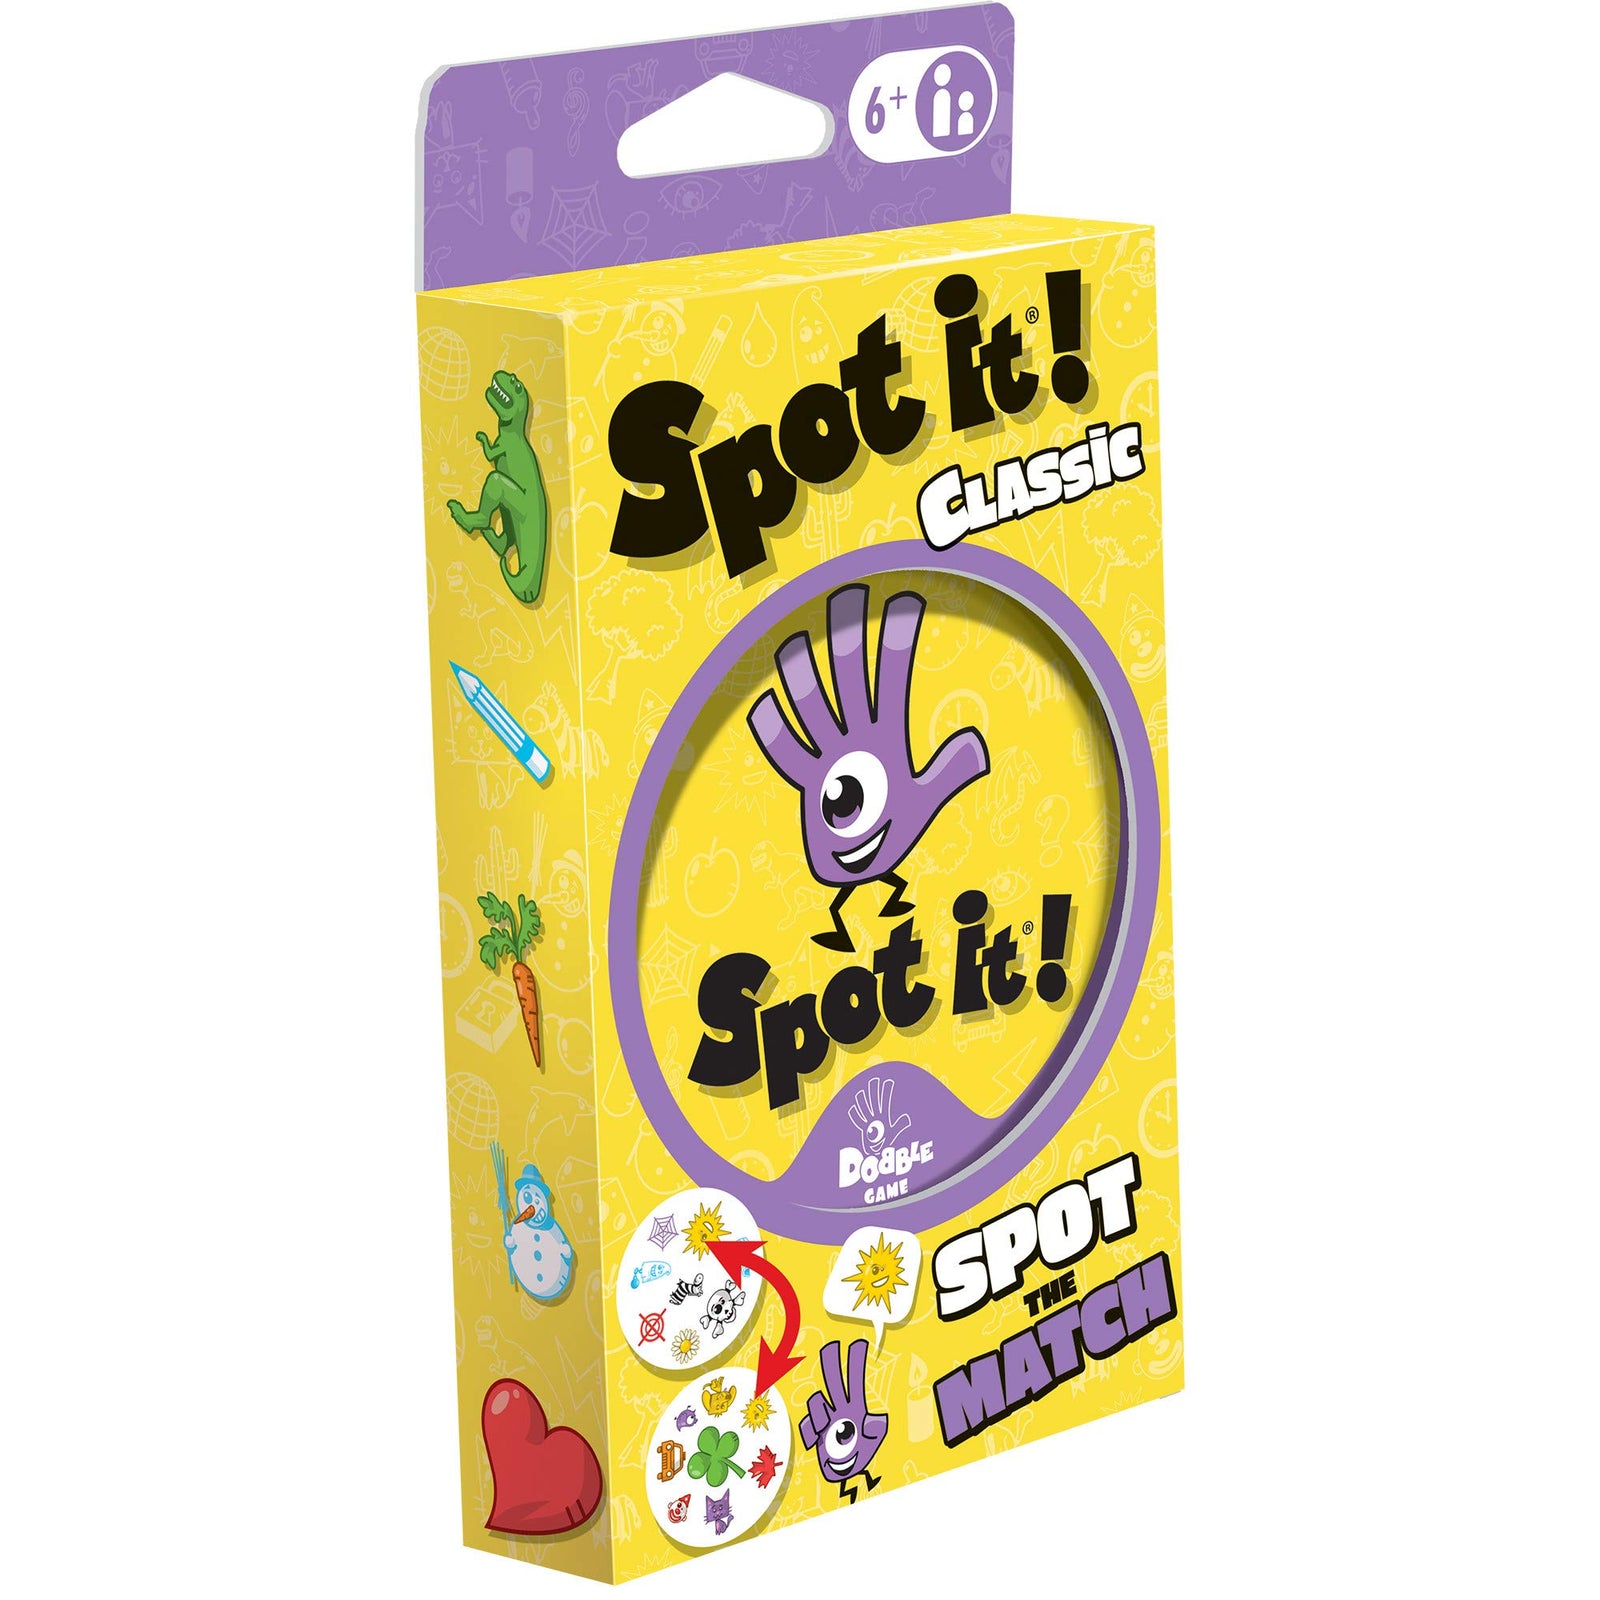 Spot It! Classic Card Game | Game For Kids | Age 6+ | 2 to 8 Players | Average Playtime 15 minutes | Eco-Blister | Made by Zygomatic